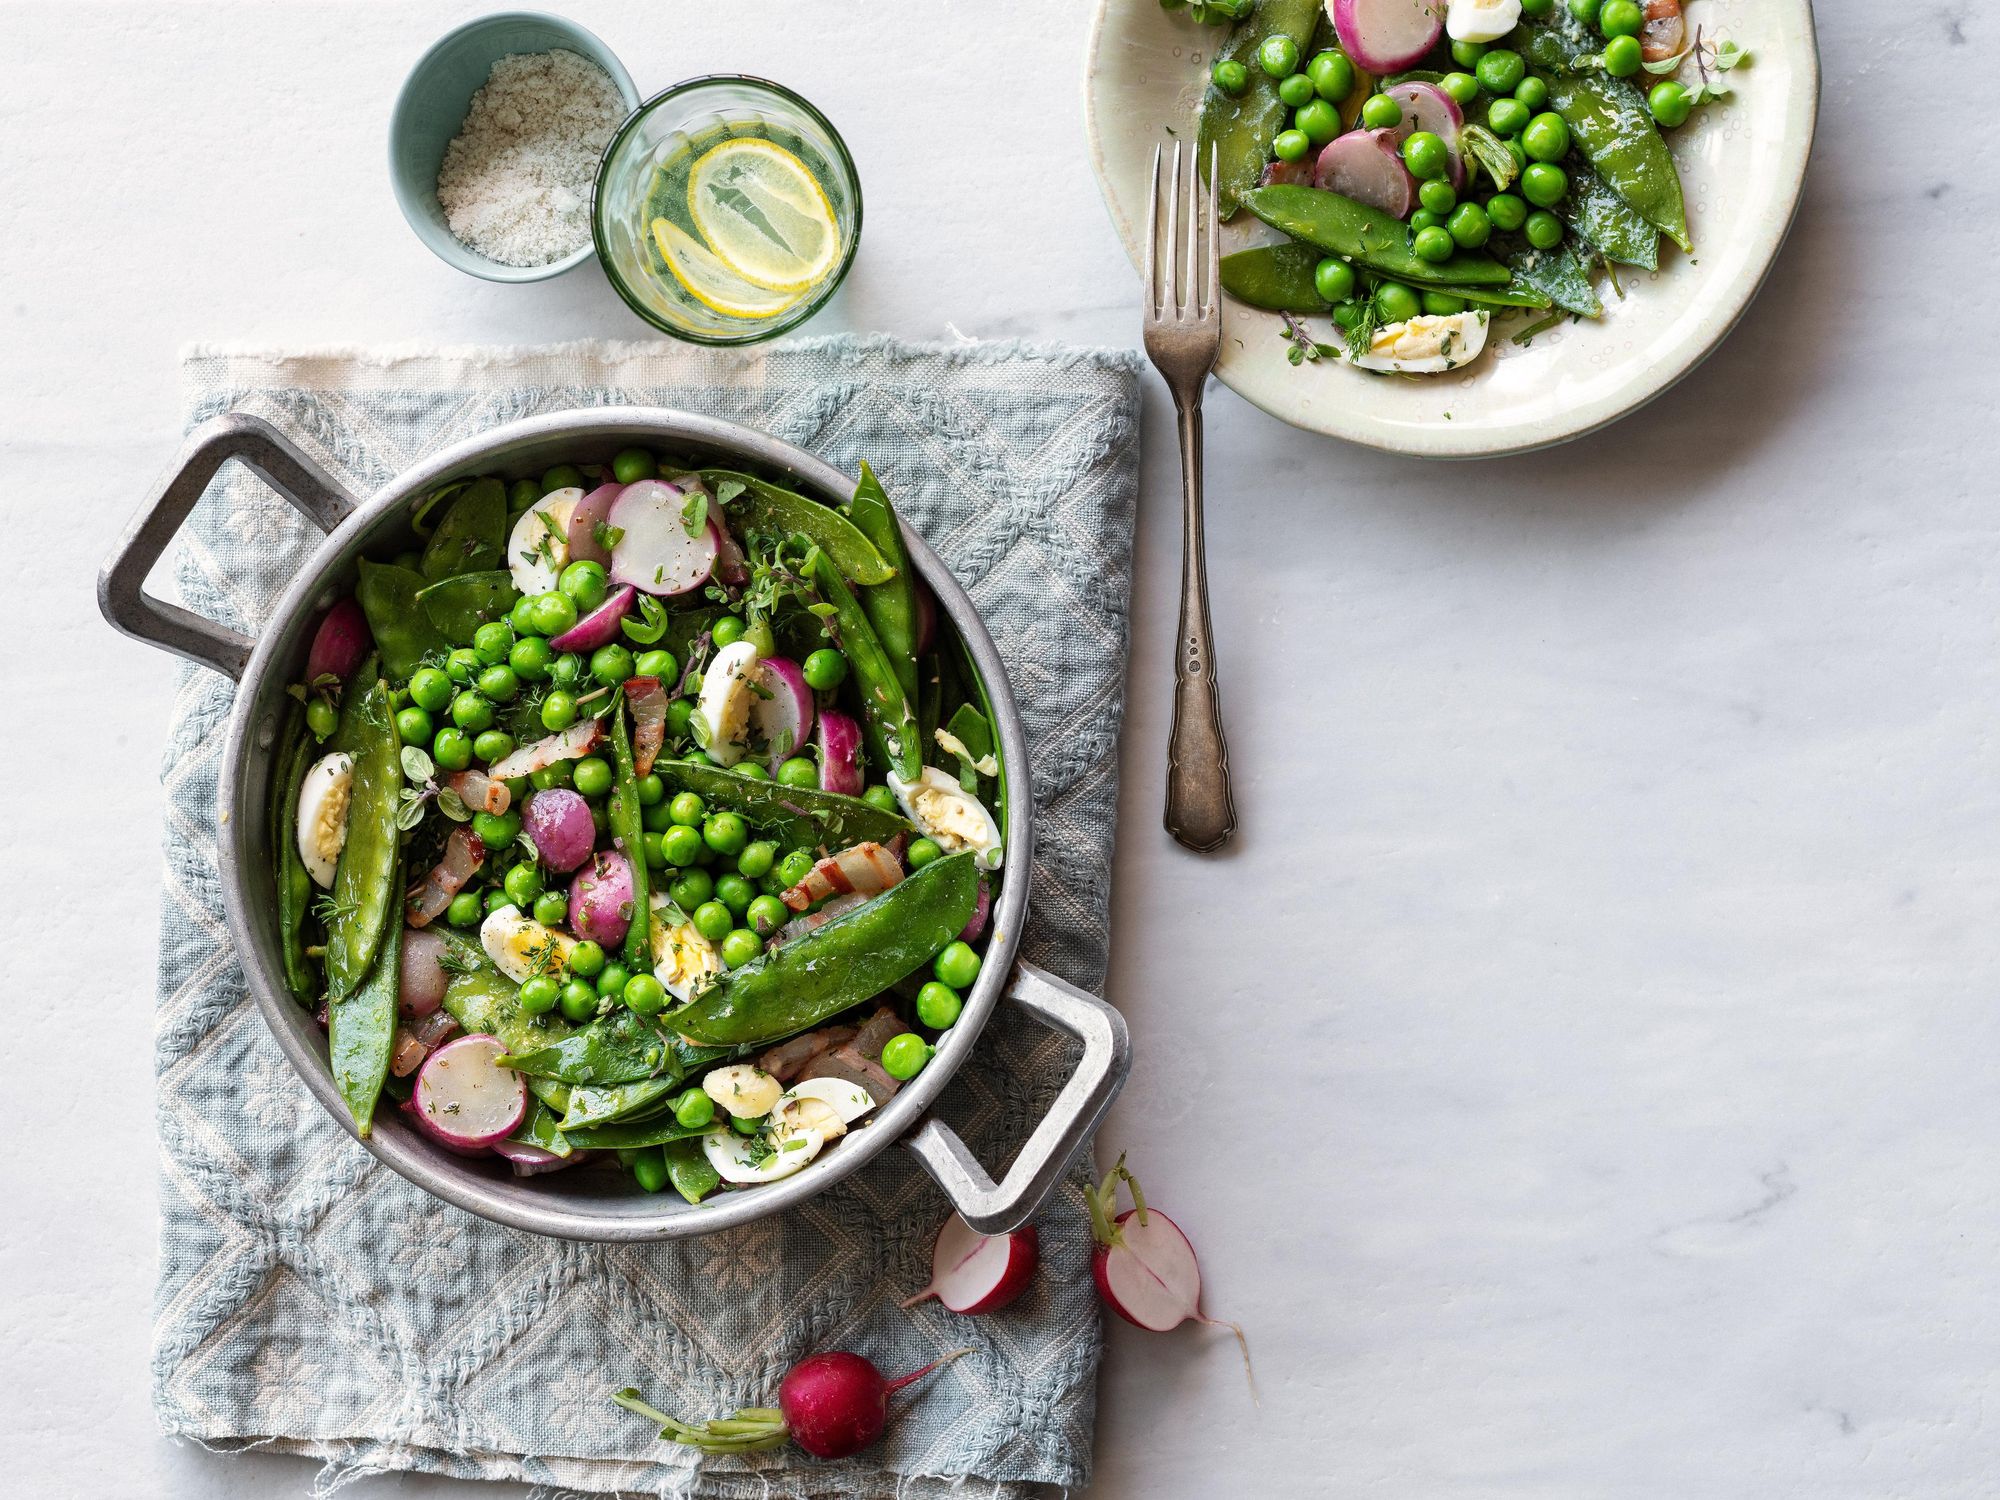 Peas with Spring Vegetables and Quail’s Eggs